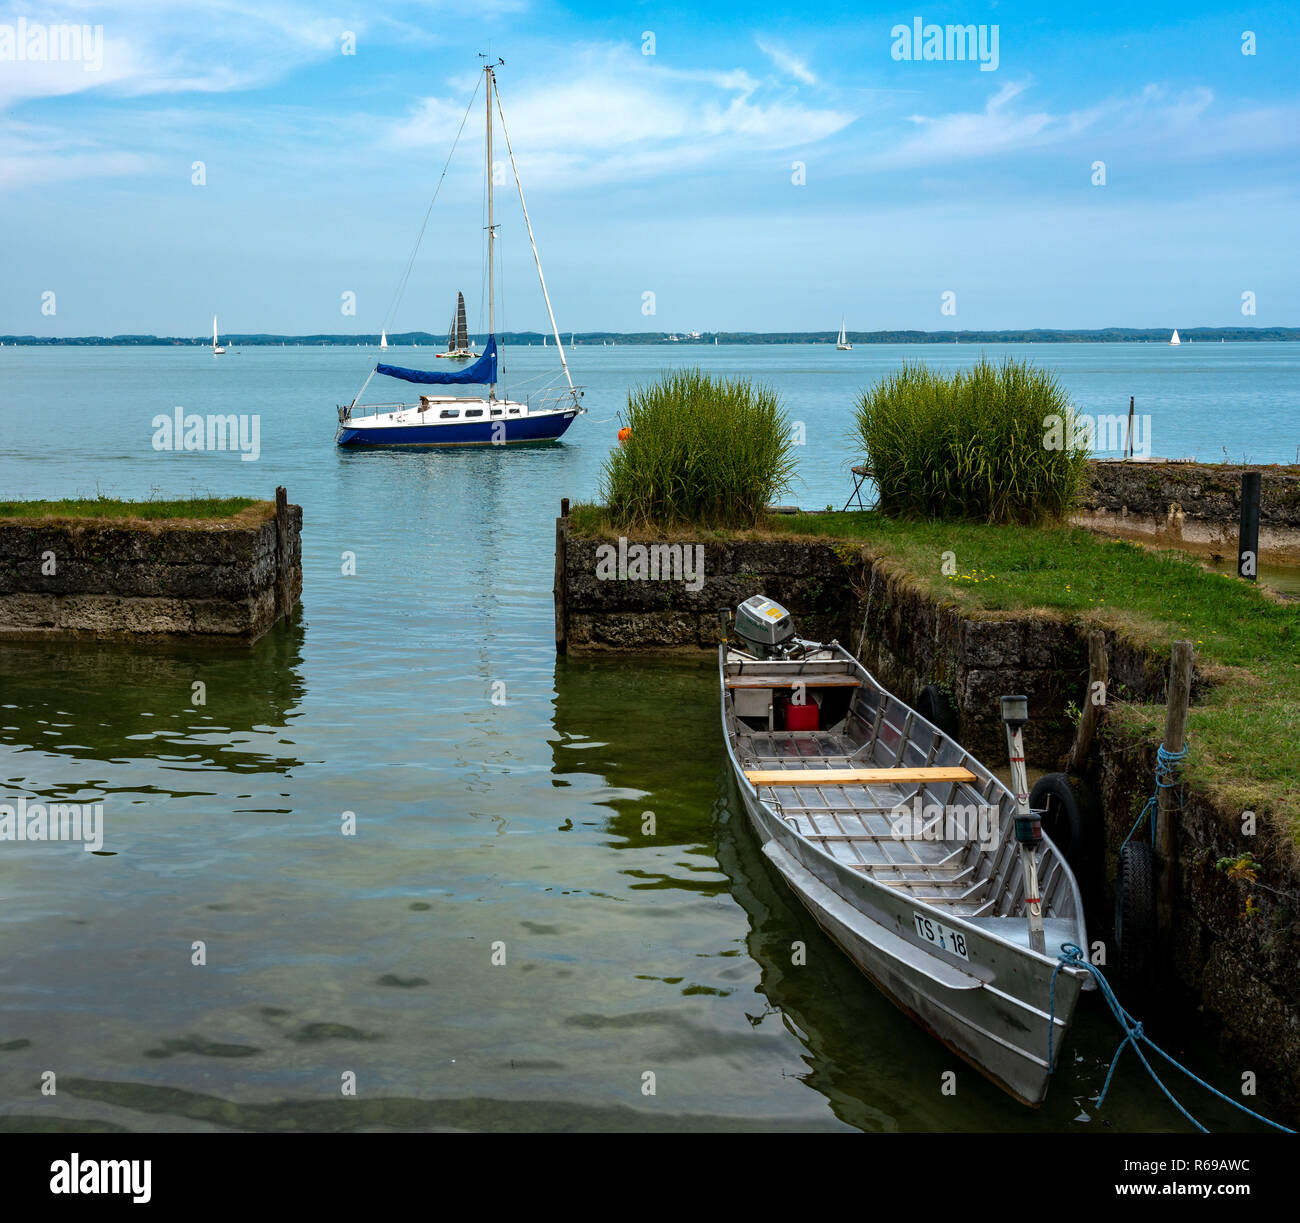 Boote am Chiemsee in Bayern Stockfoto